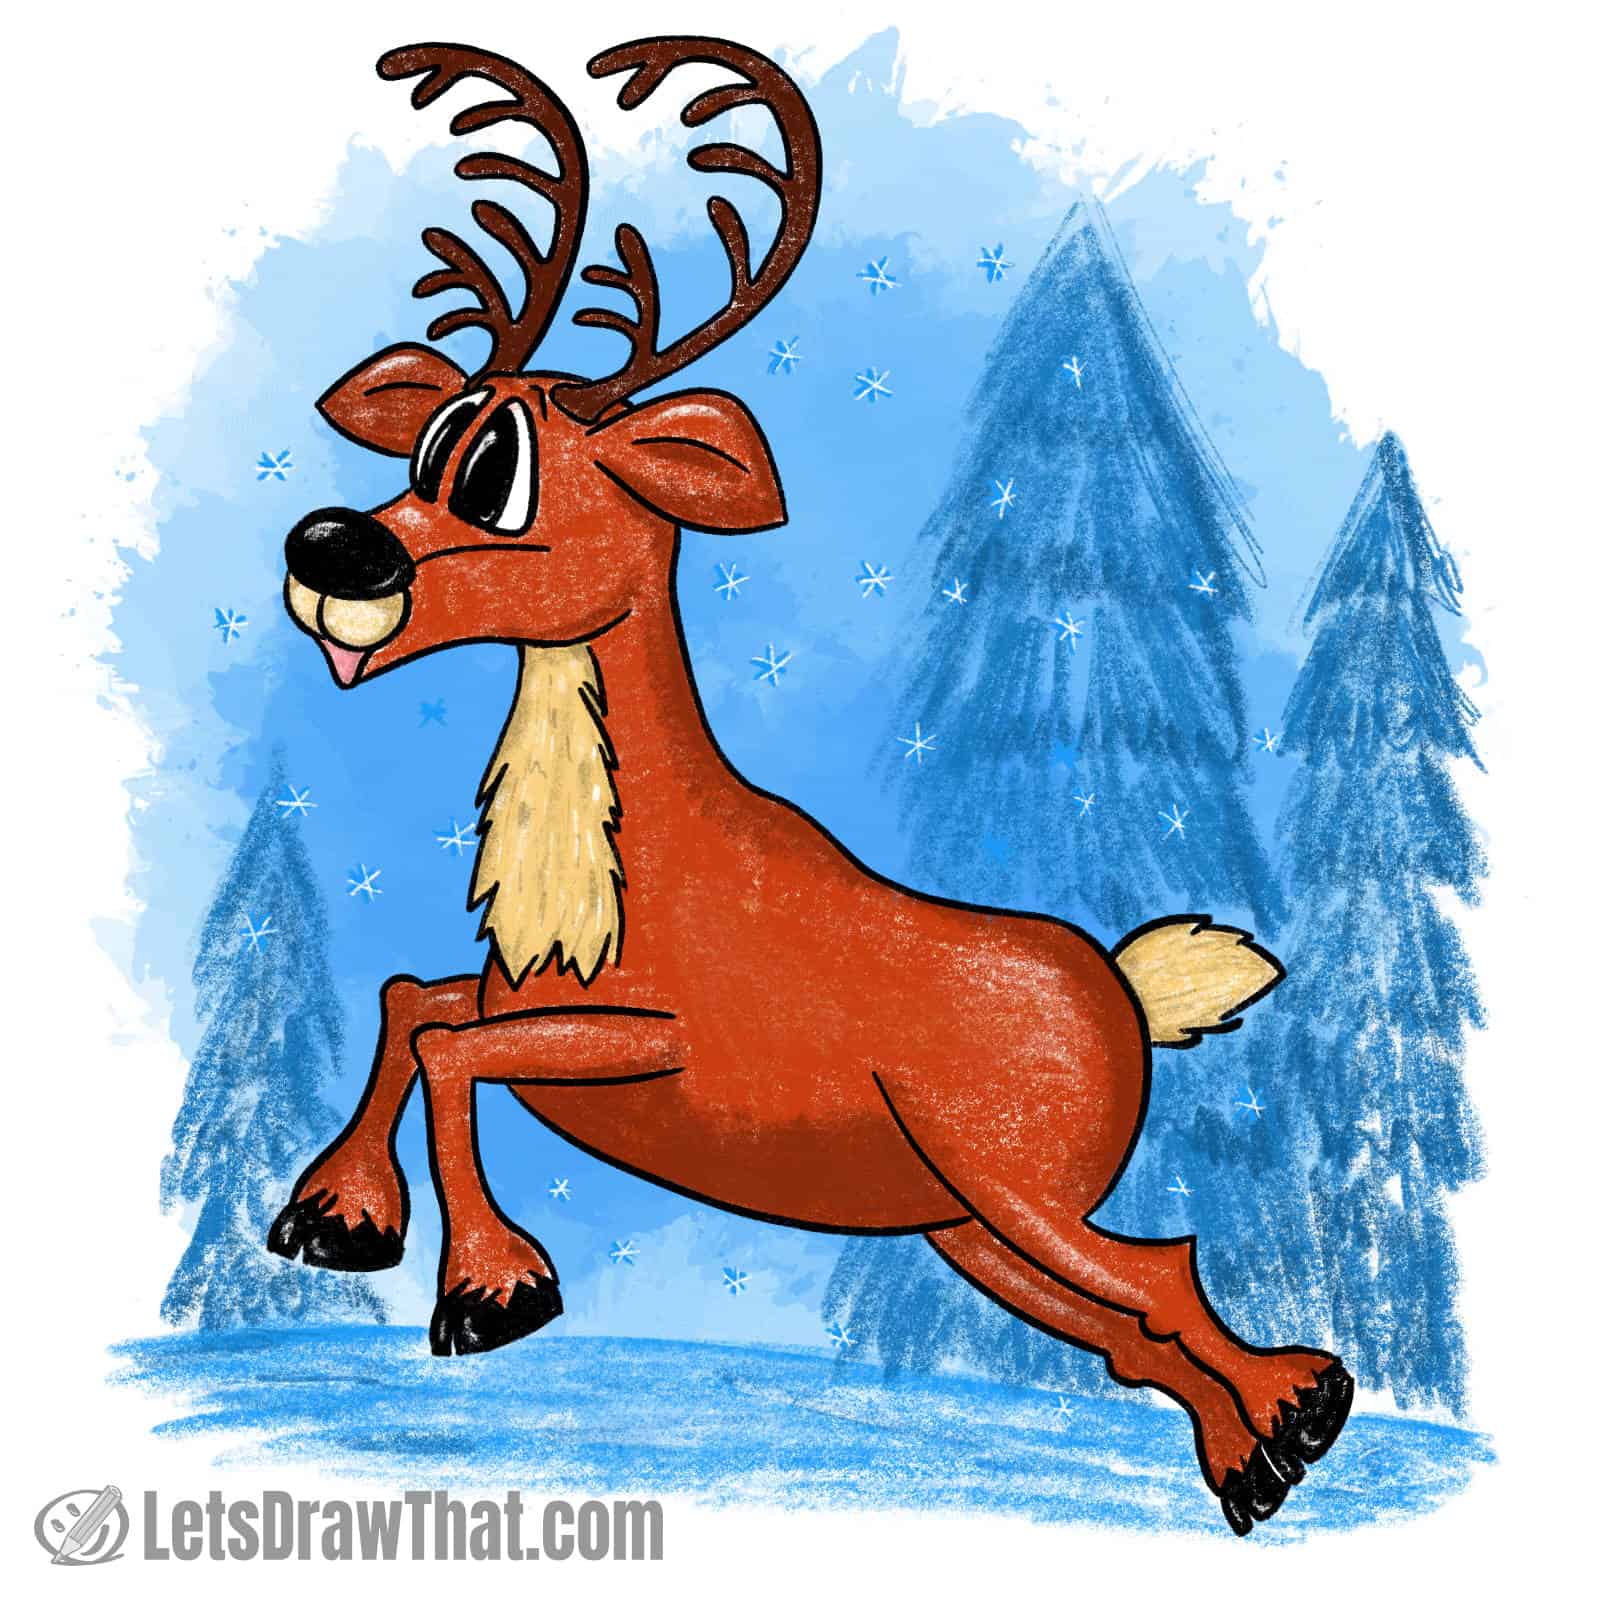 How to draw a reindeer: finished drawing coloured-in